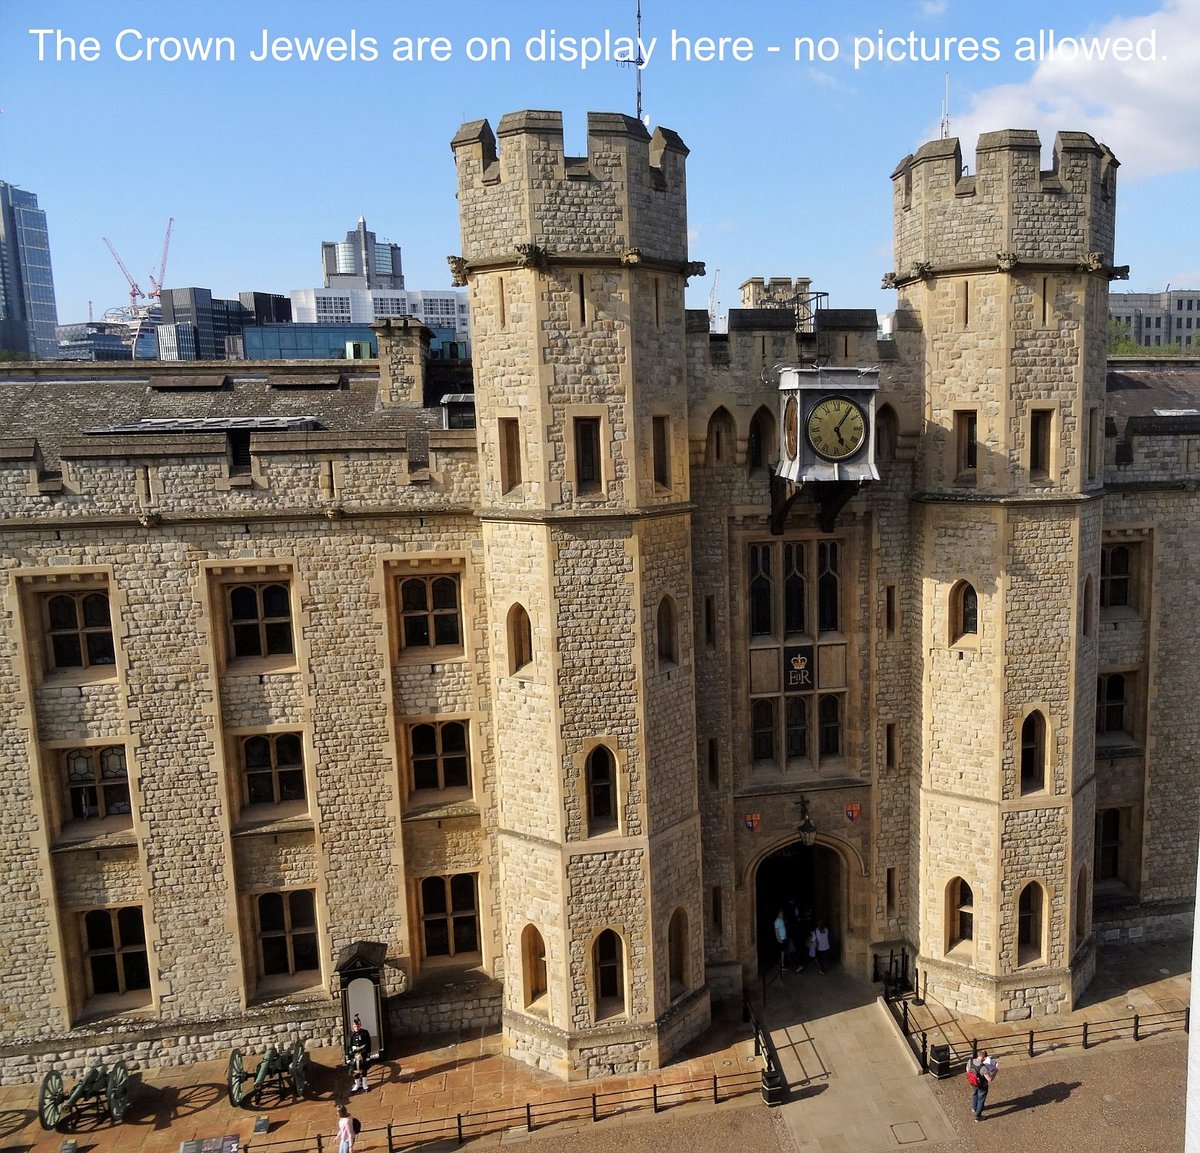 inside tower of london crown jewels